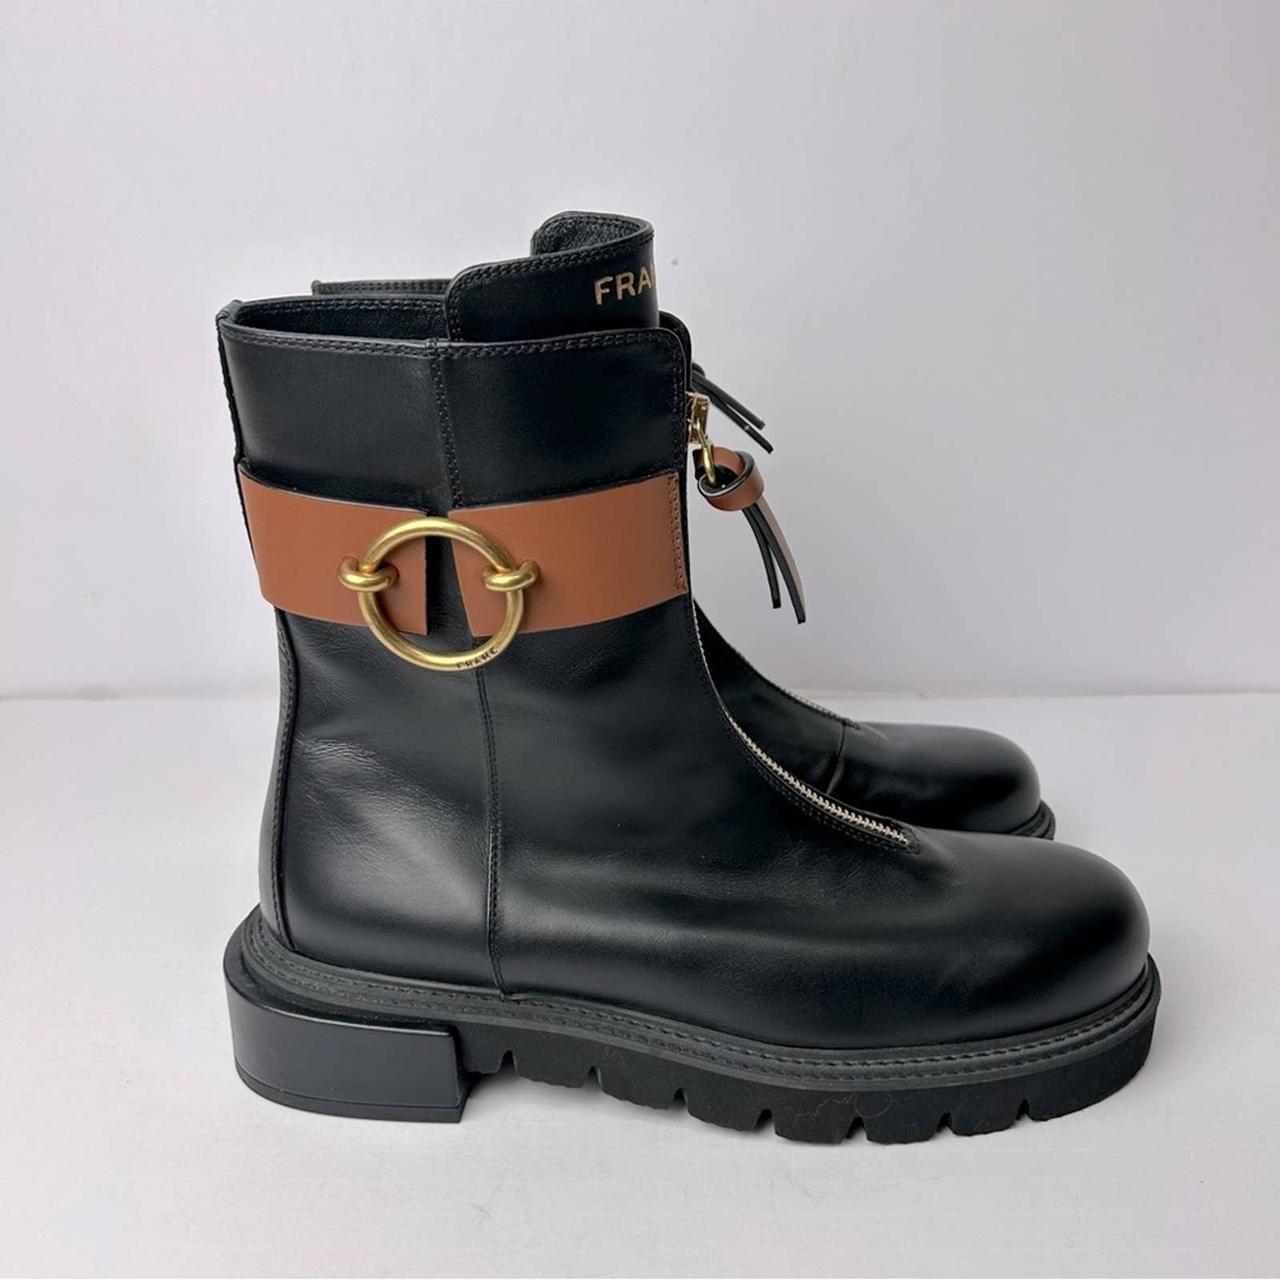 Christian Dior Leather Boots in size 40